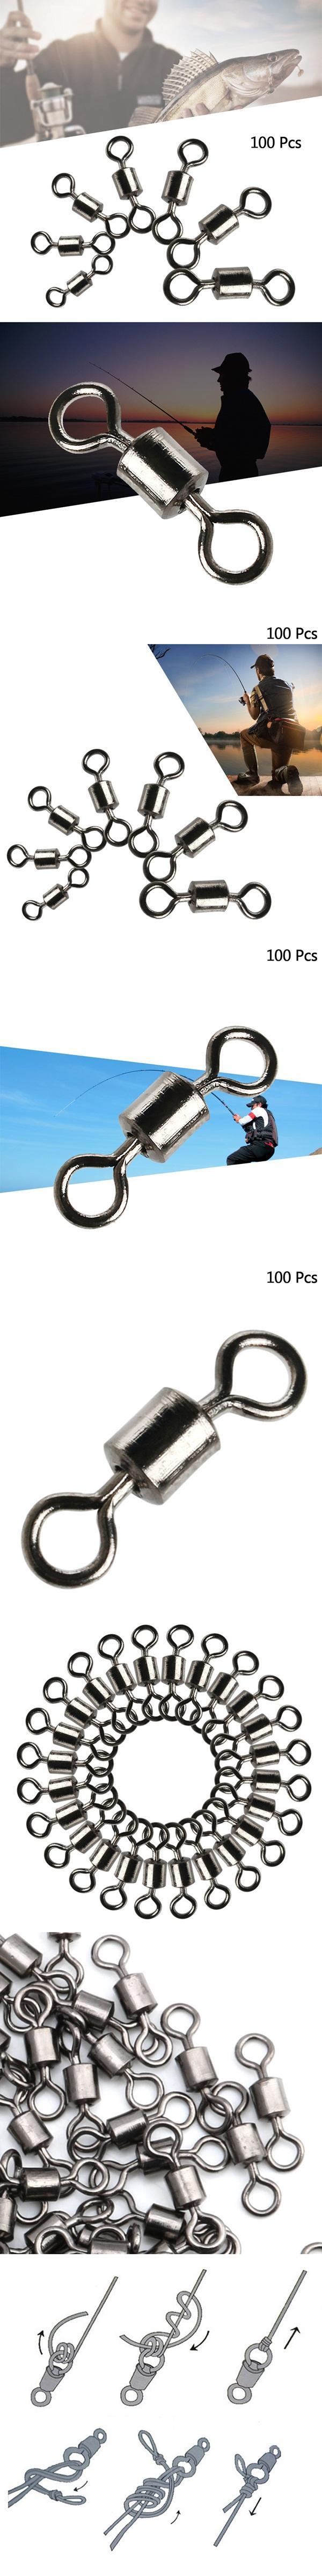 Pro 100Pcs Fishing Barrel Bearing Swivel Stainless Steel Solid Ring Connector GA